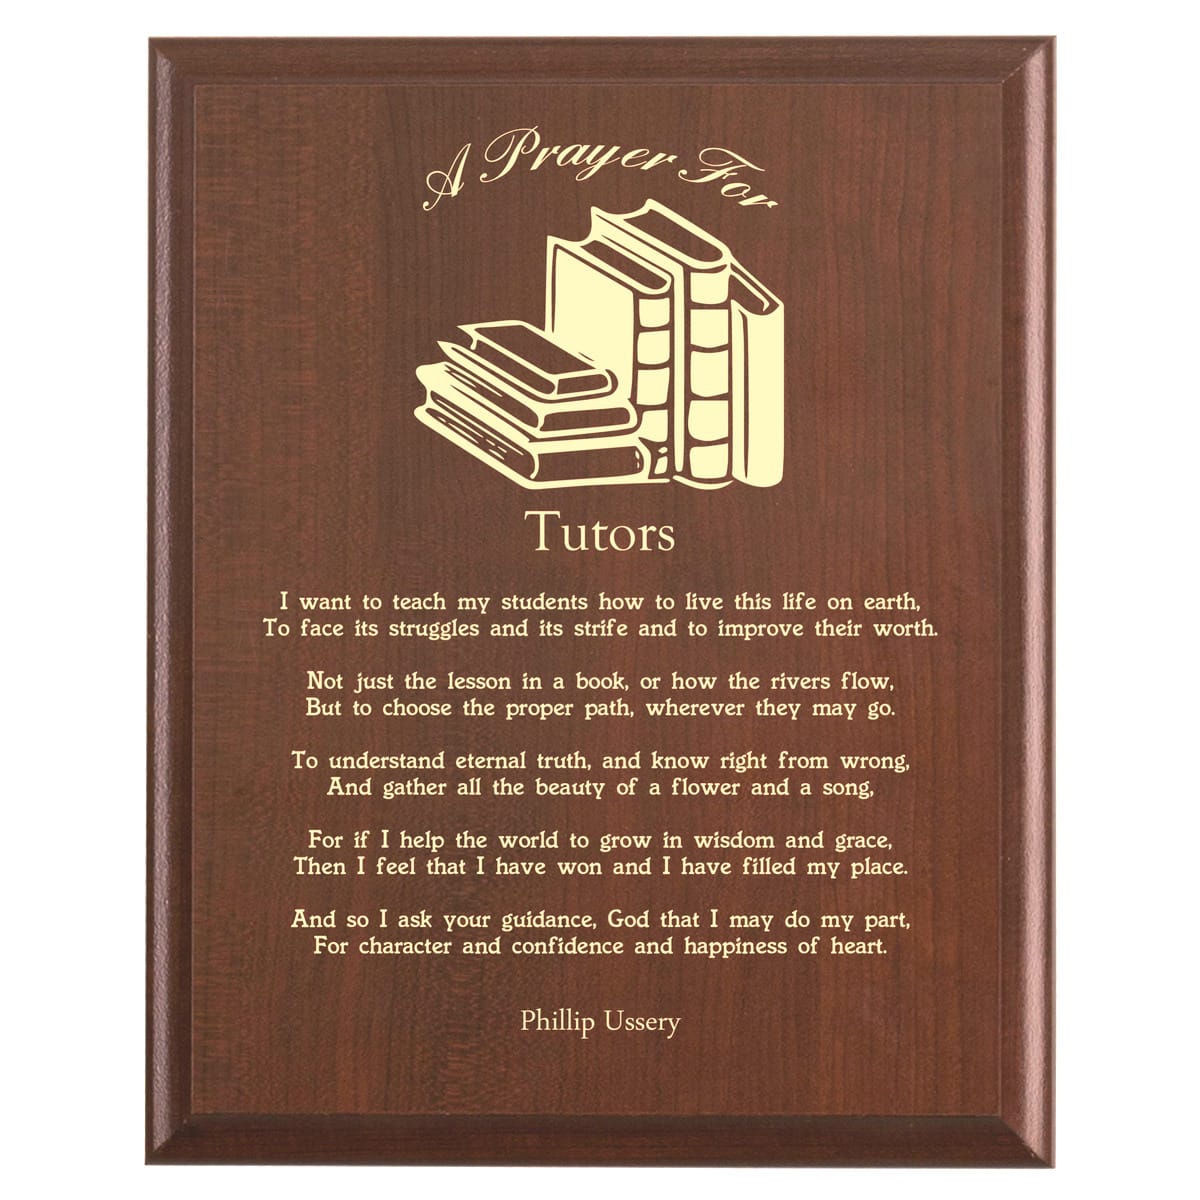 Plaque photo: Tutor Prayer Plaque design with free personalization. Wood style finish with customized text.